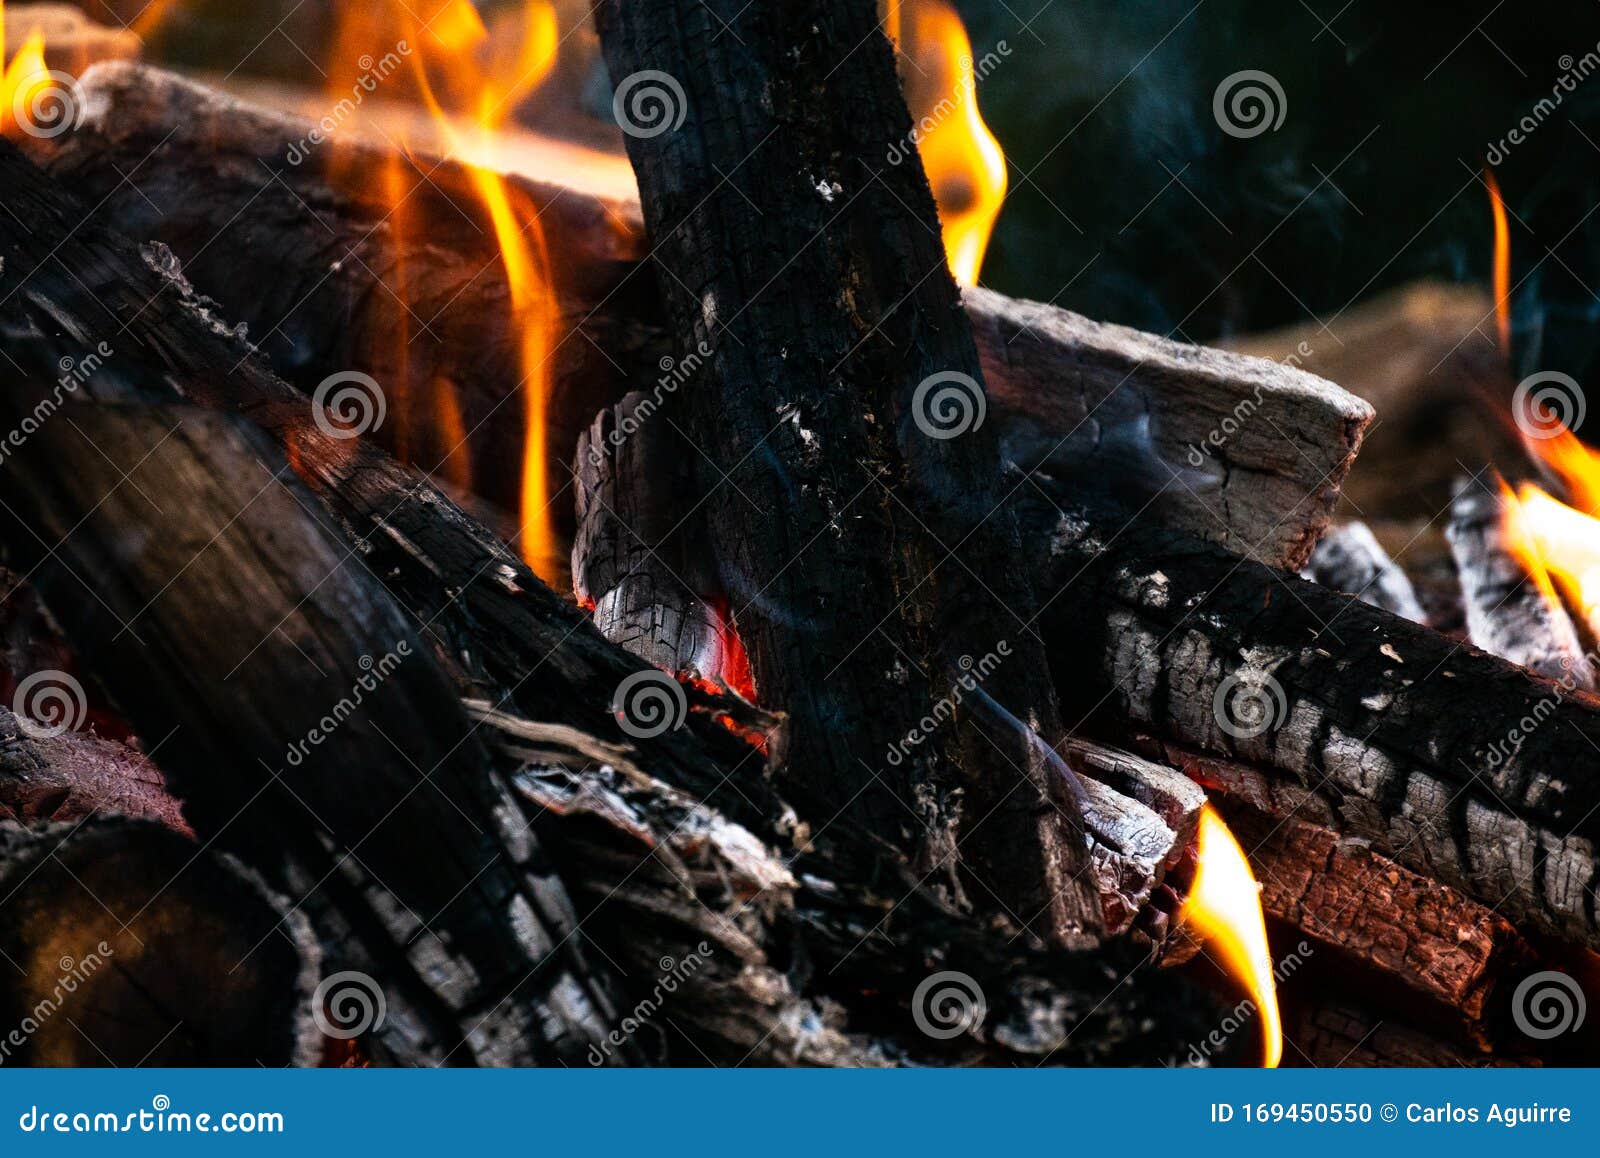 wood in the fire burning and turning ash